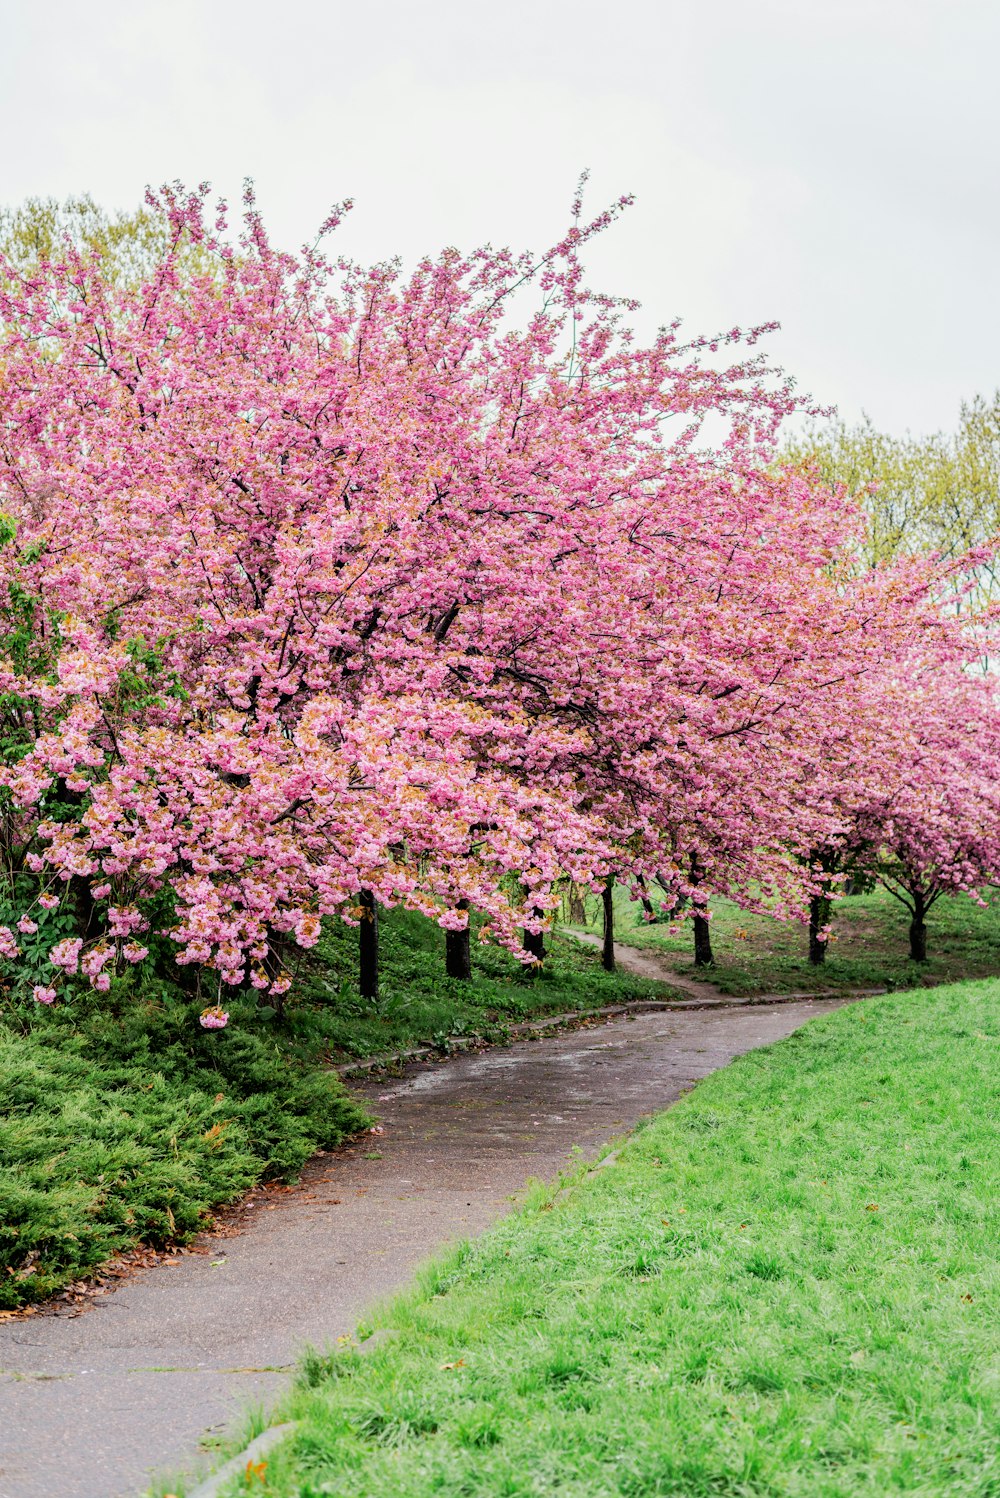 a path lined with pink flowers next to a lush green field